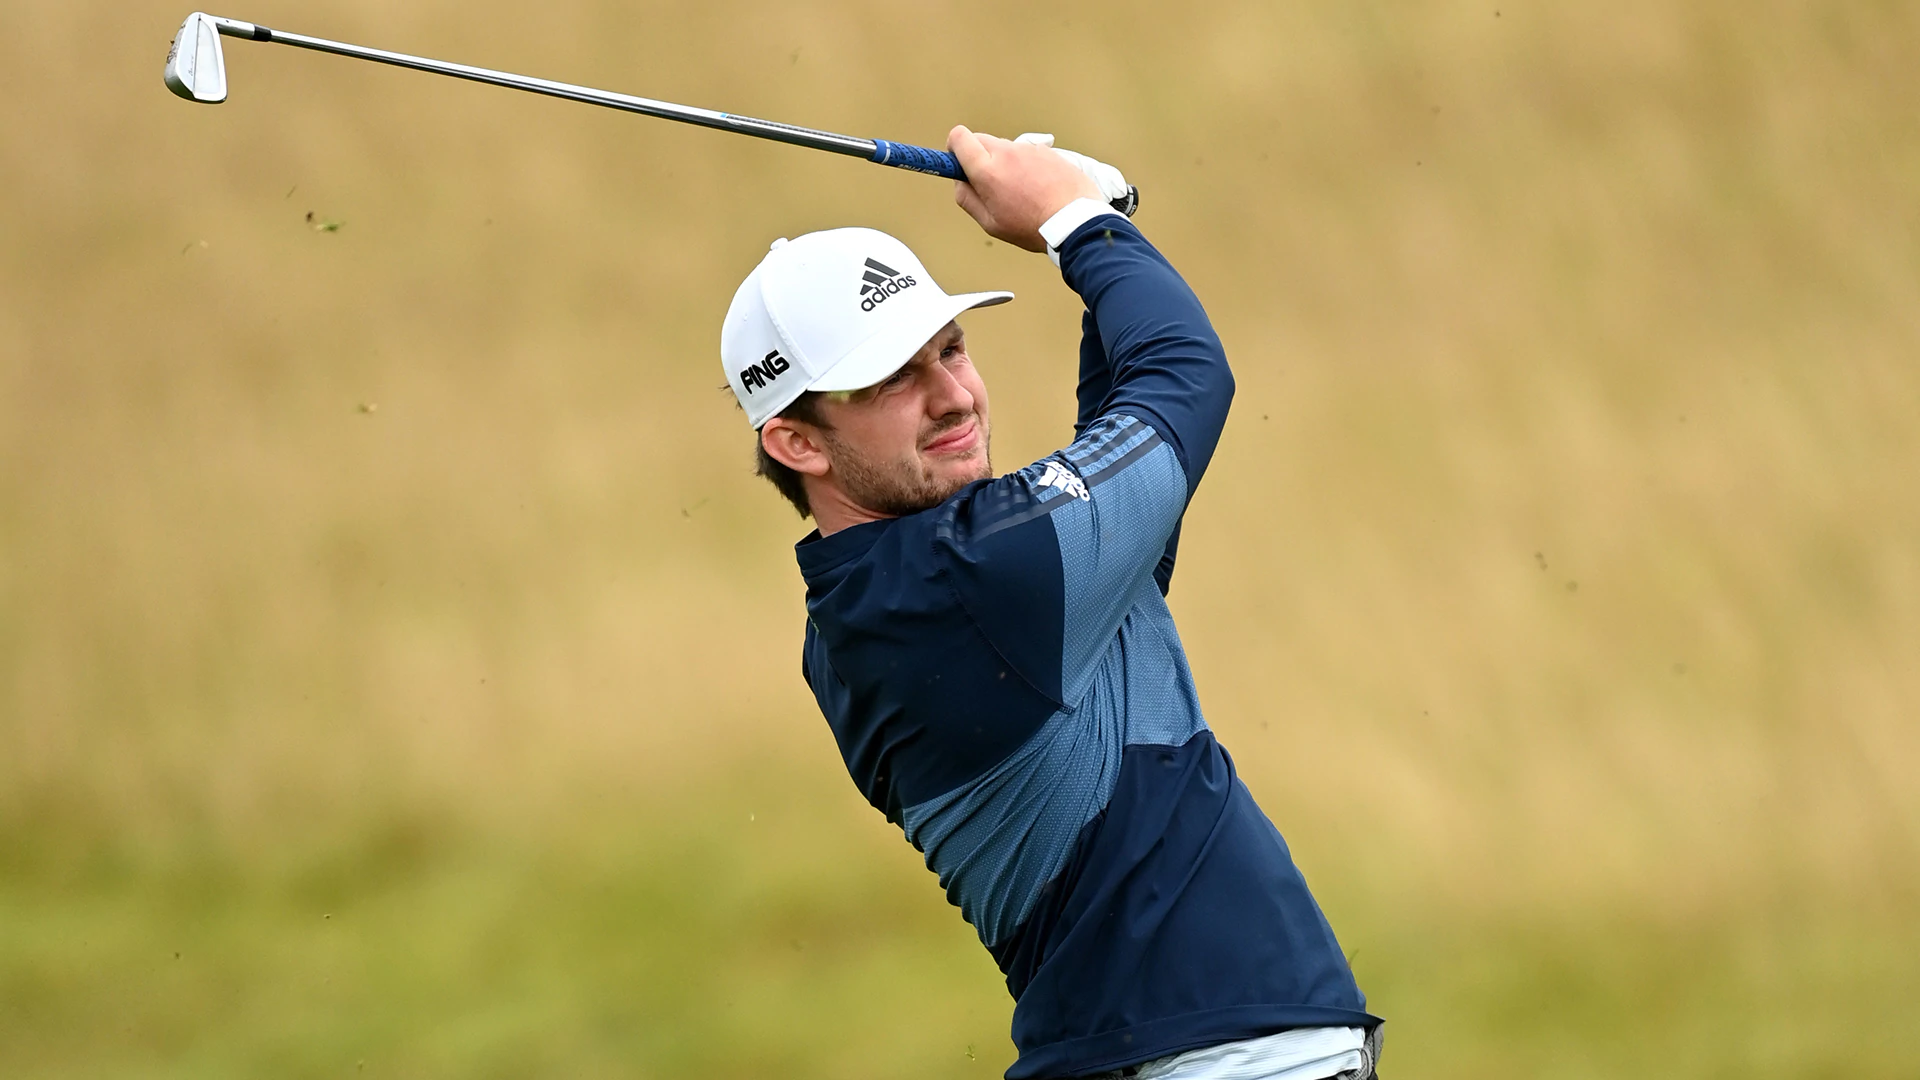 Connor Syme (70) battles wind, rain to take two-shot lead at Wales Open